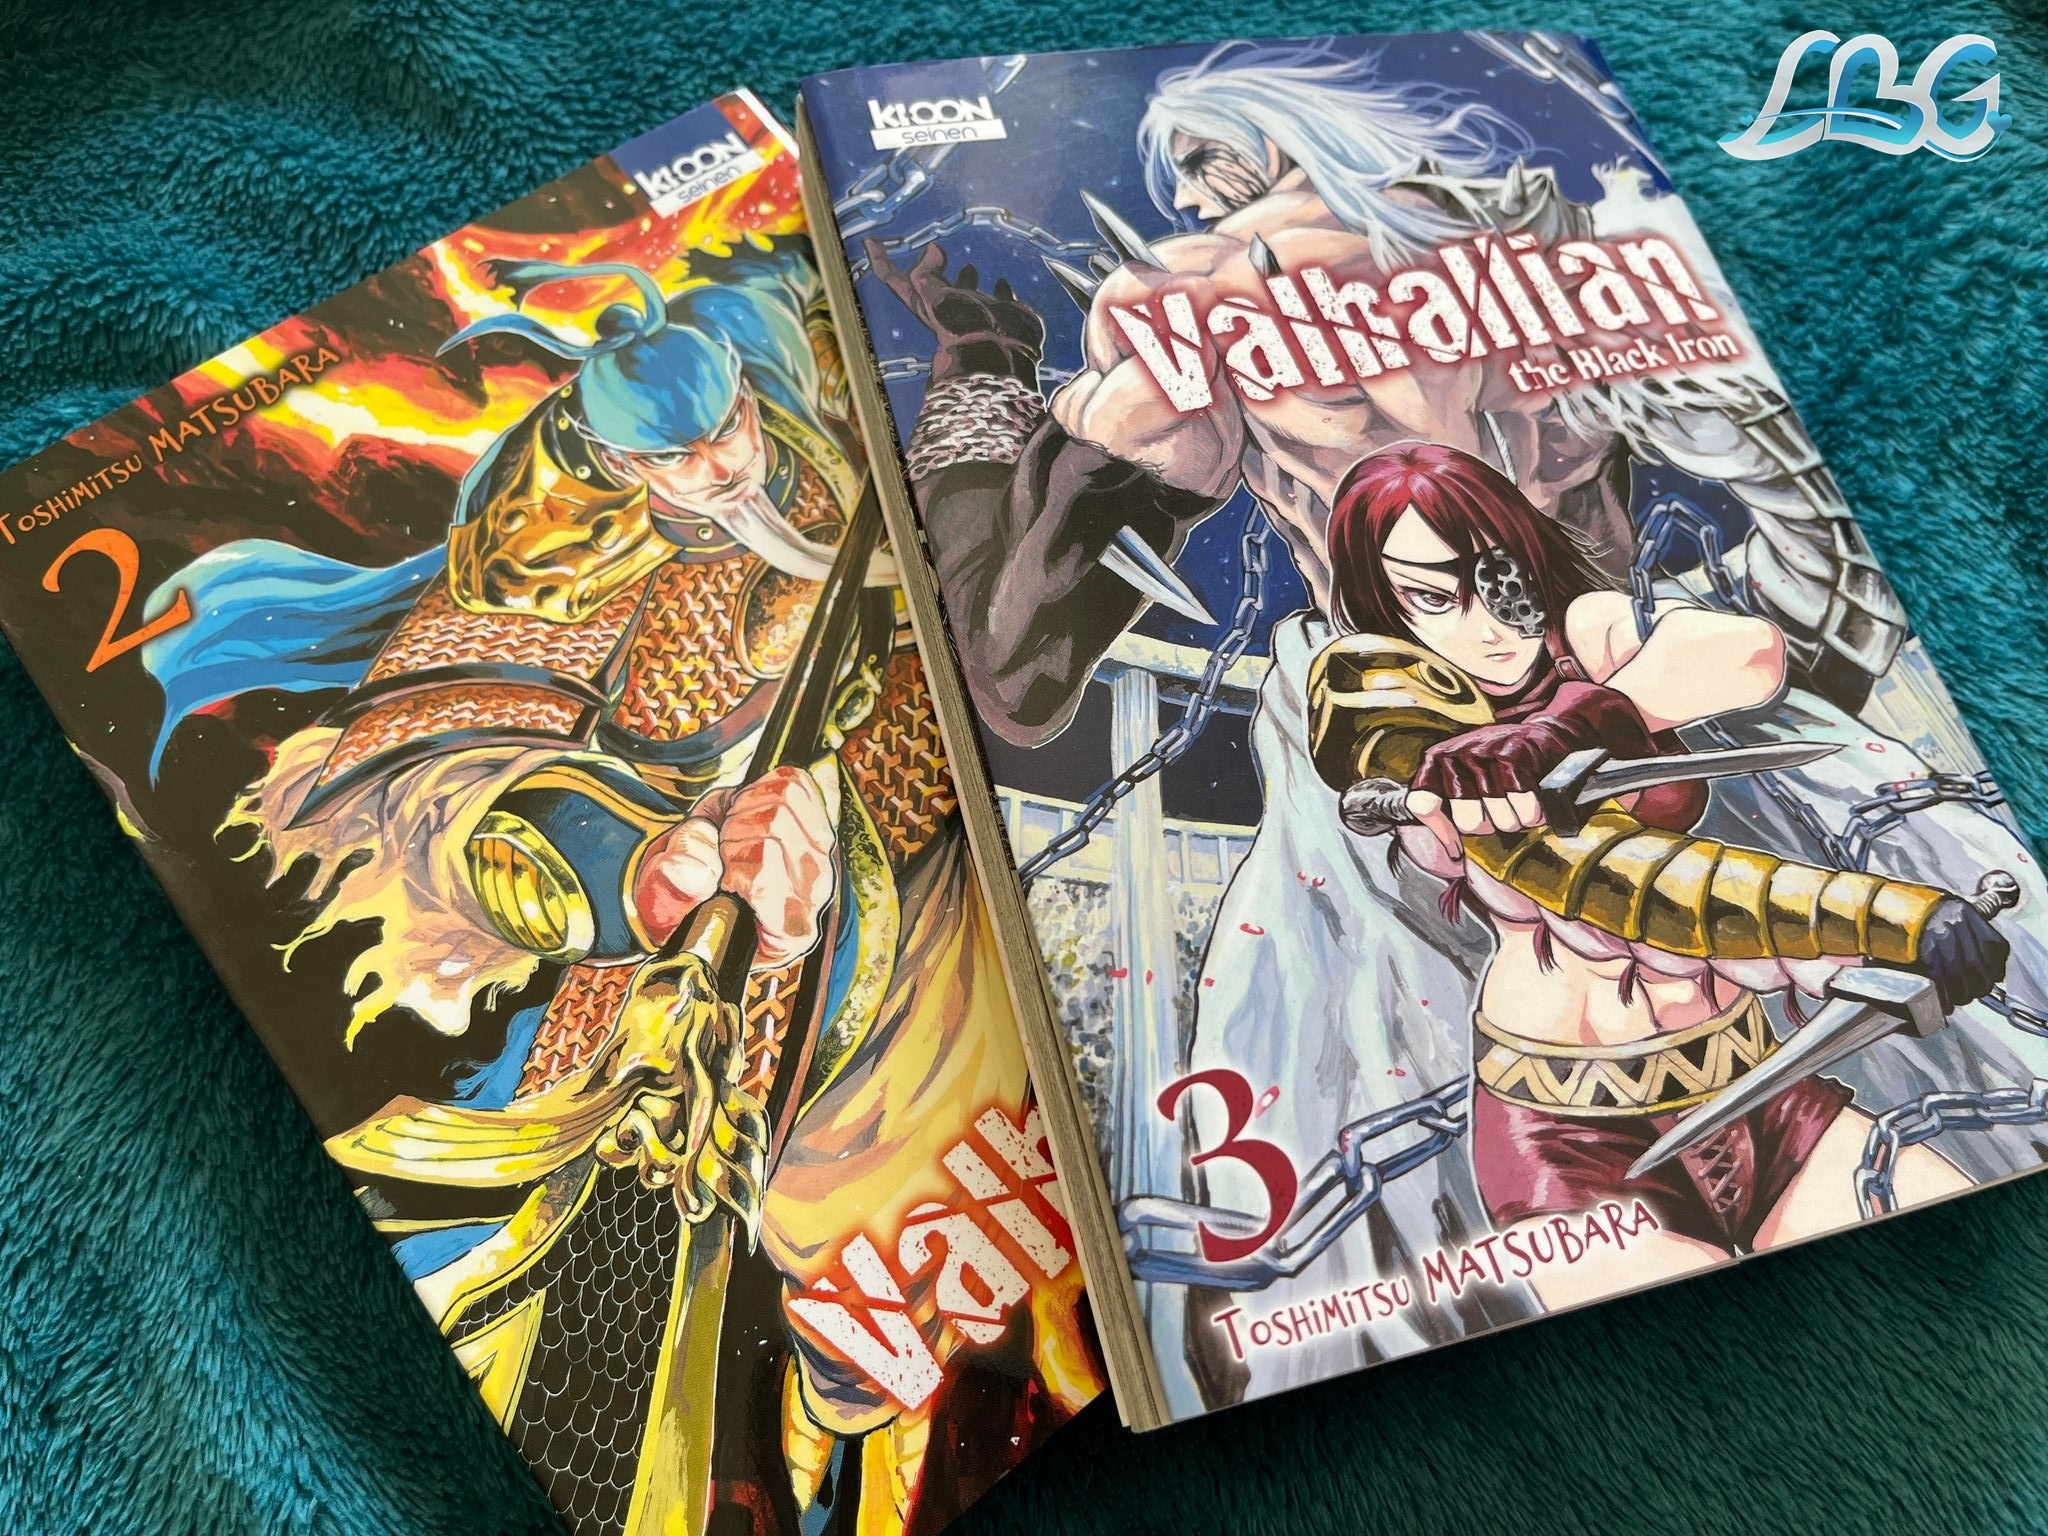 Valhallian the Black Iron – Tome 2 & 3 couvertues